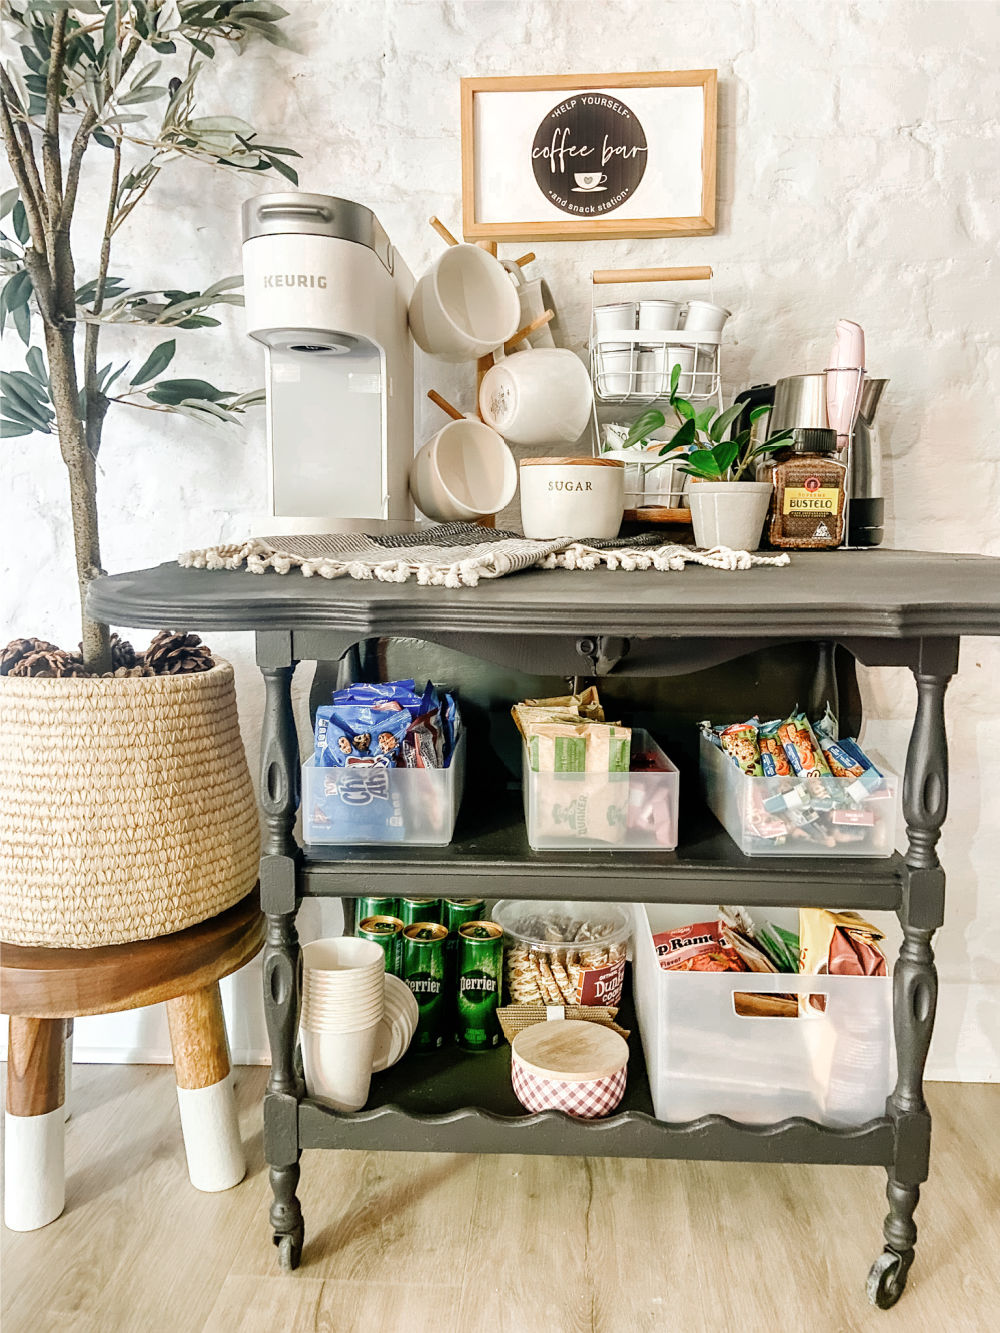 Coffee and Snack Bar Cart Upcycle. Create a beverage and snack station for guests by painting a vintage cart and giving it new life!